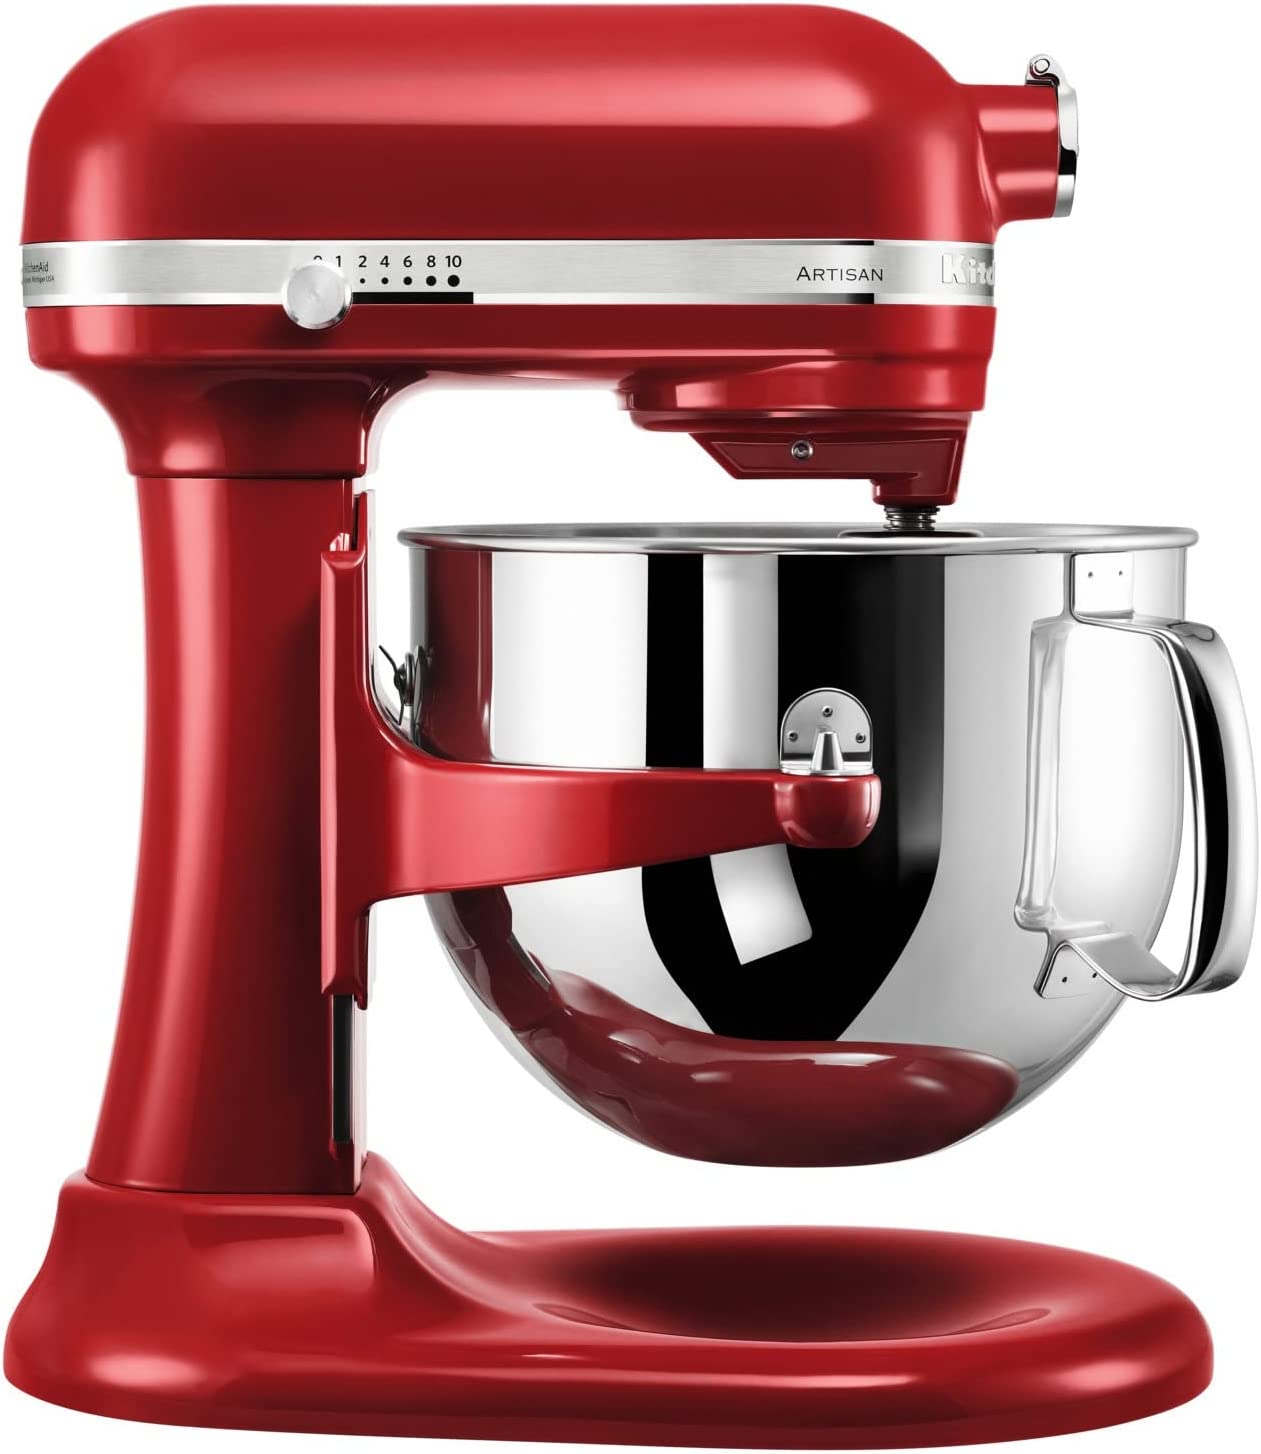 What are the best stand mixers for bakers?